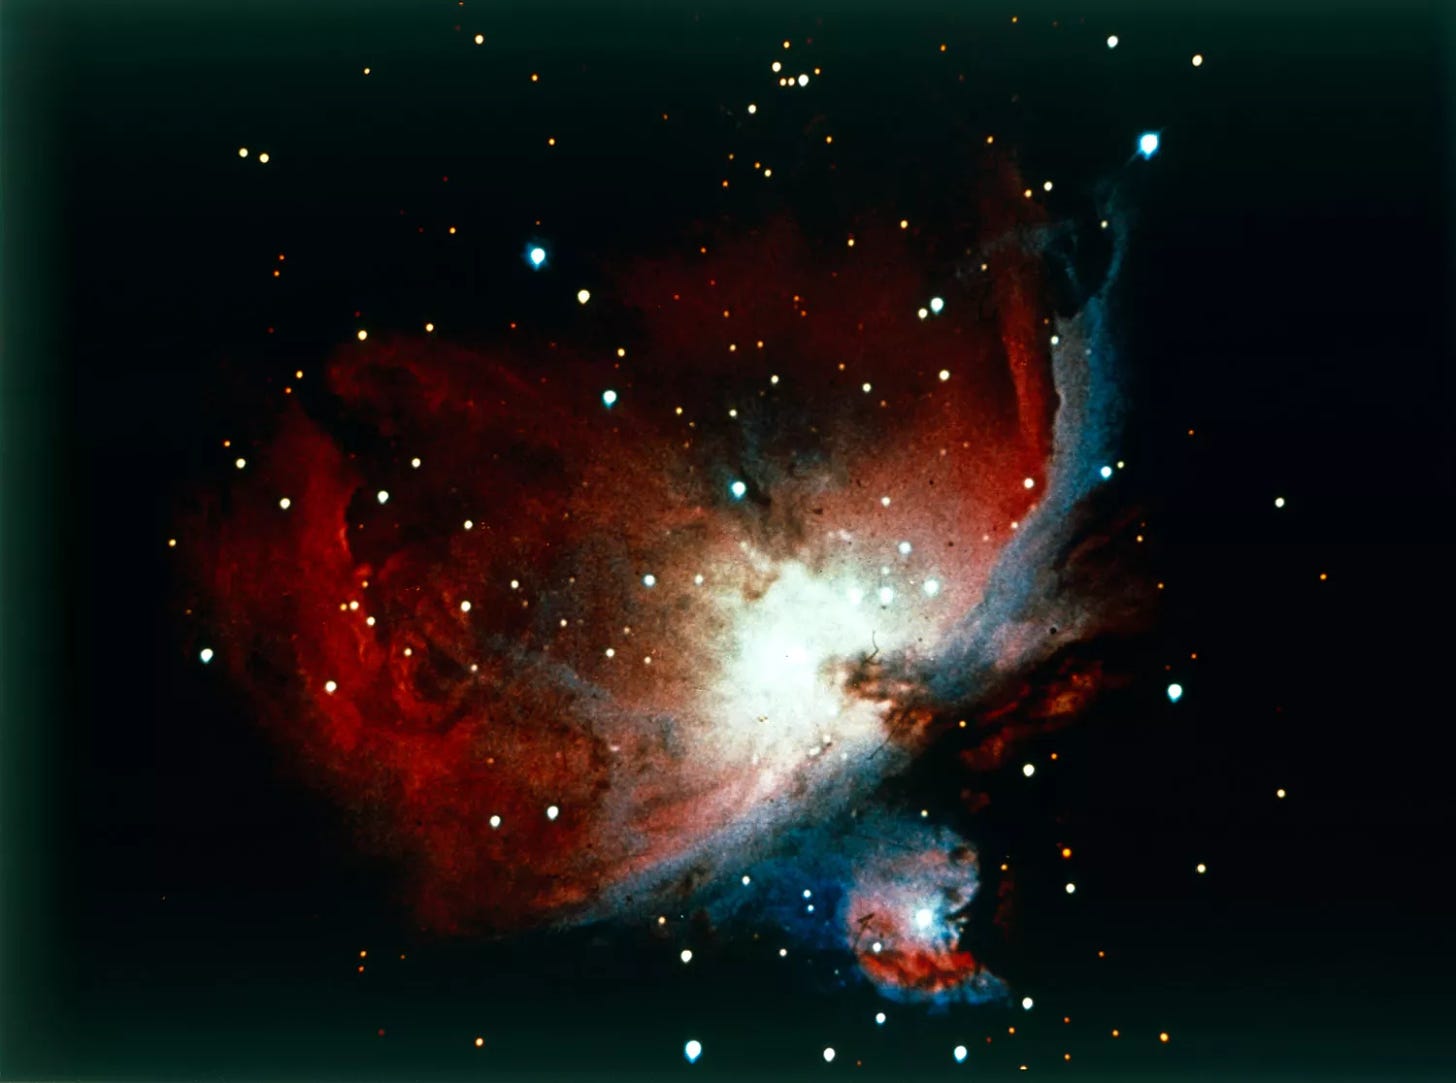 The Orion Nebula. The Orion Nebula (Messier 42) is stellar nursery only 1,500 light-years away, making it the closest large star-forming region to Earth in the constellation of Orion. It has been known to many different cultures throughout human history and can be spotted with the naked eye.